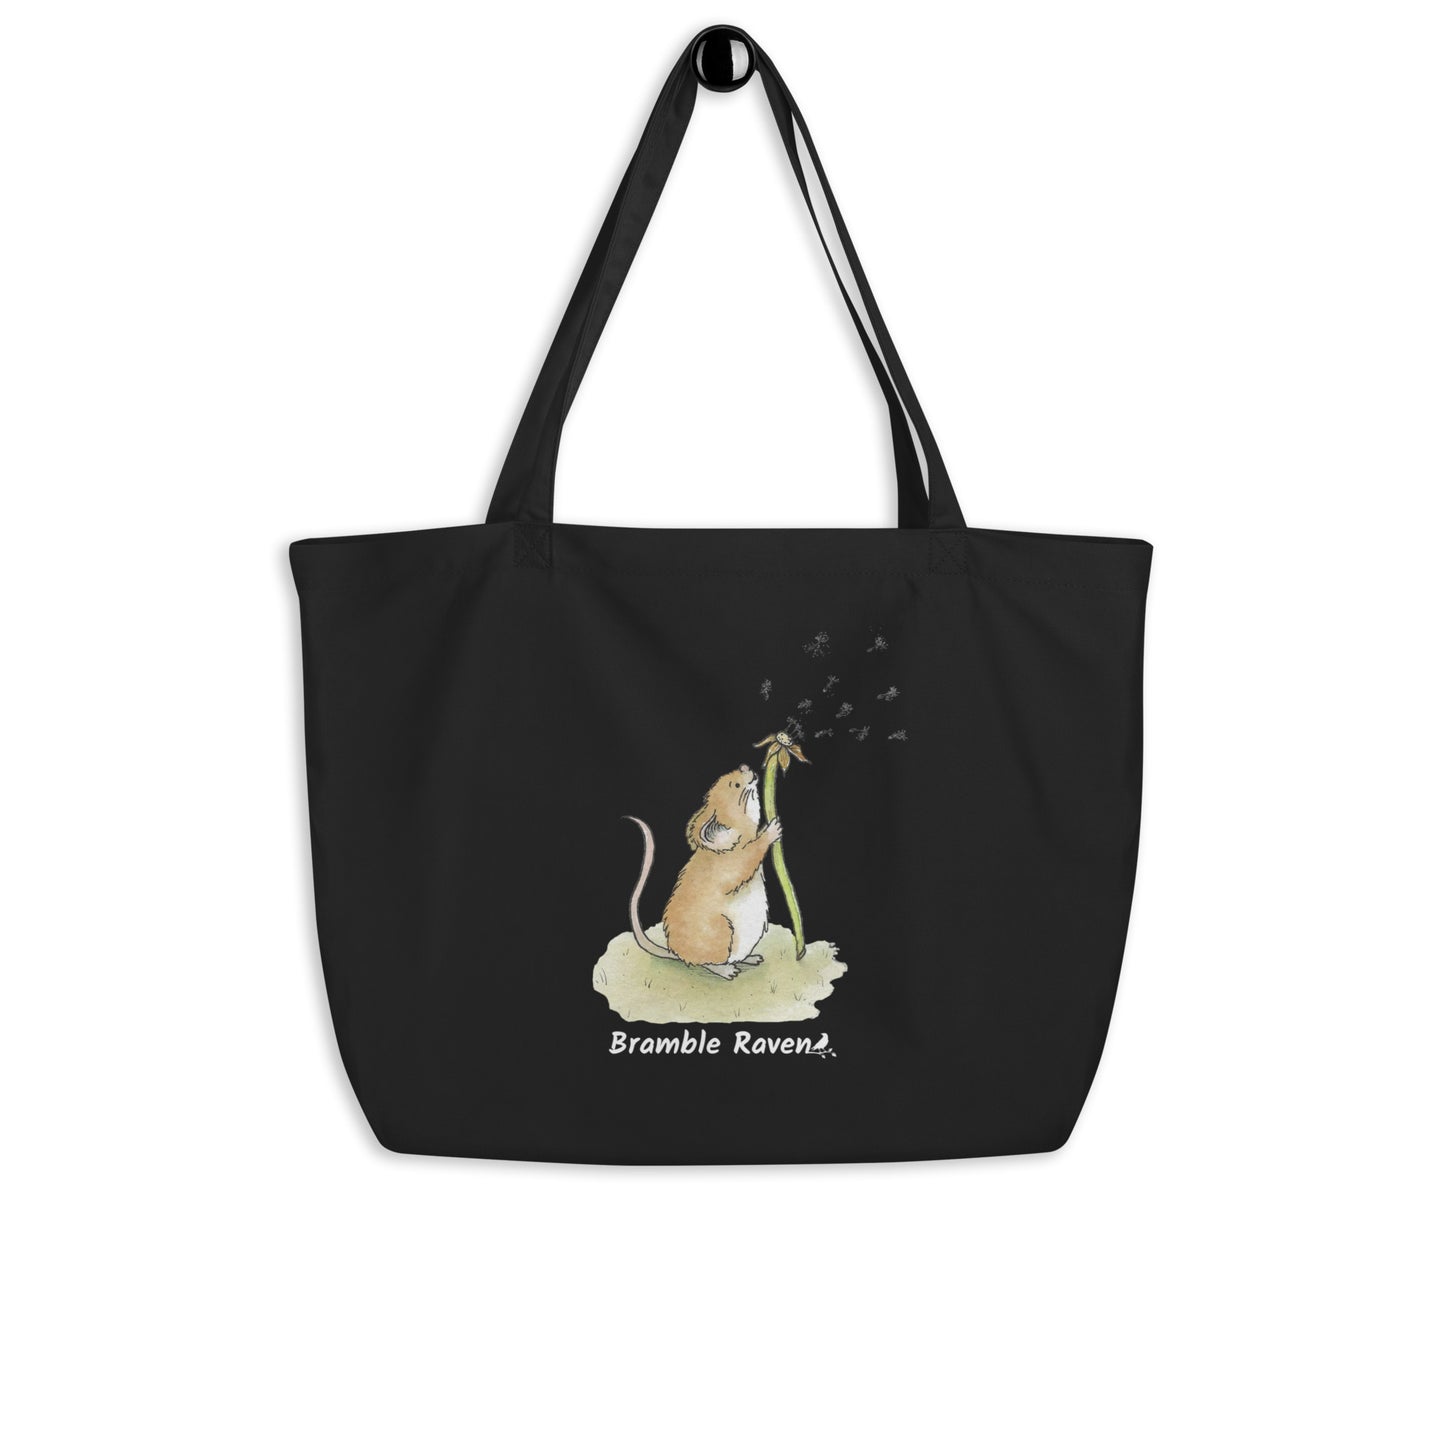 Original watercolor Dandelion wish design of a cute mouse blowing dandelion seeds. Printed on large black colored eco tote. 20 by 14 by 5 inches.